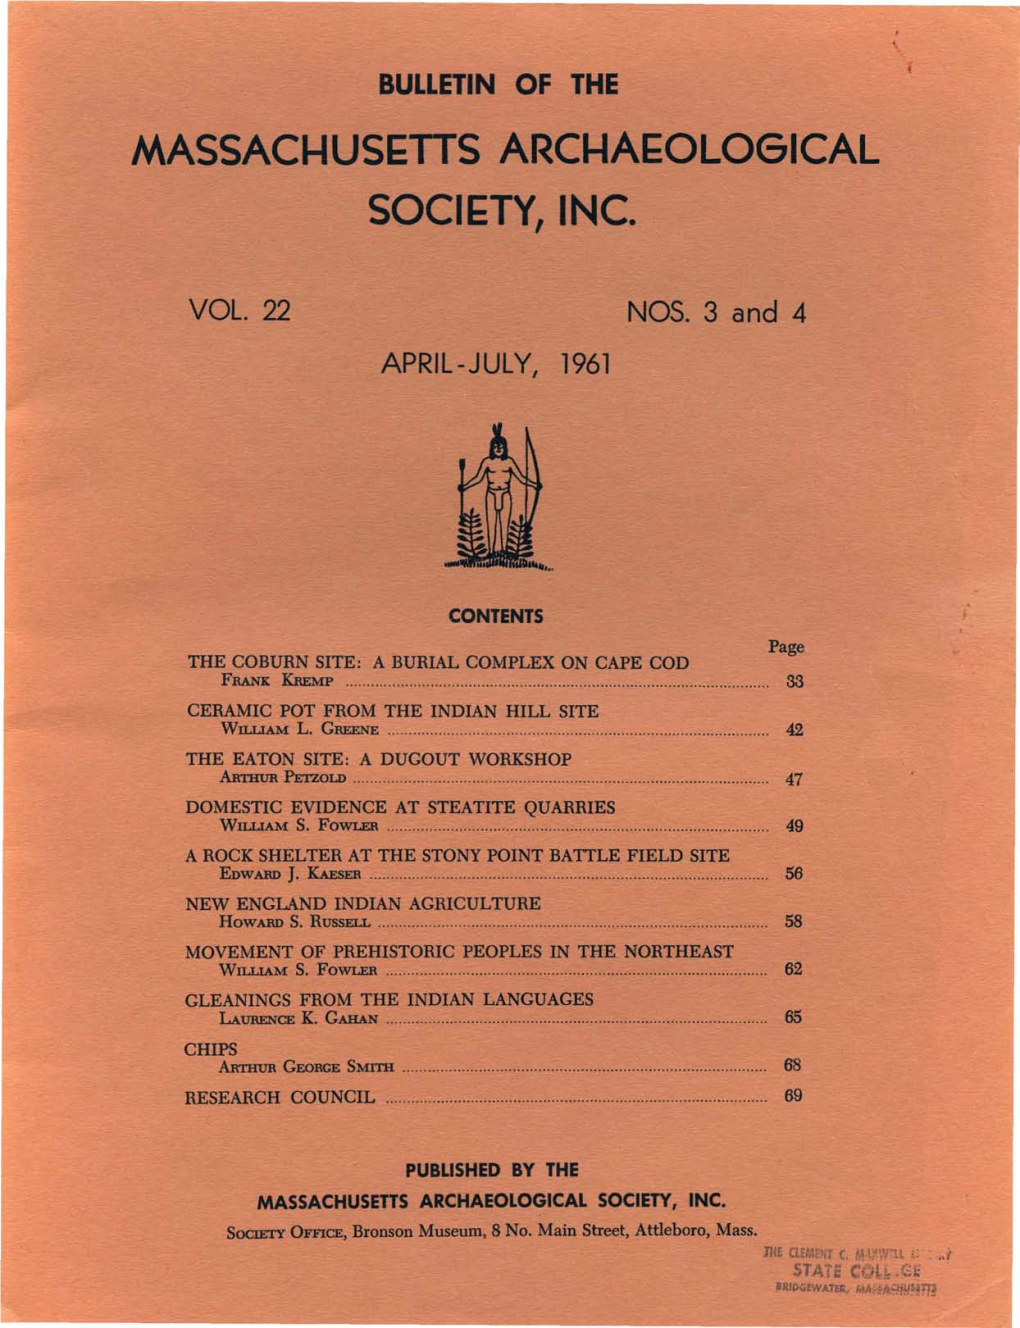 Bulletin of the Massachusetts Archaeological Society, Vol. 22, No